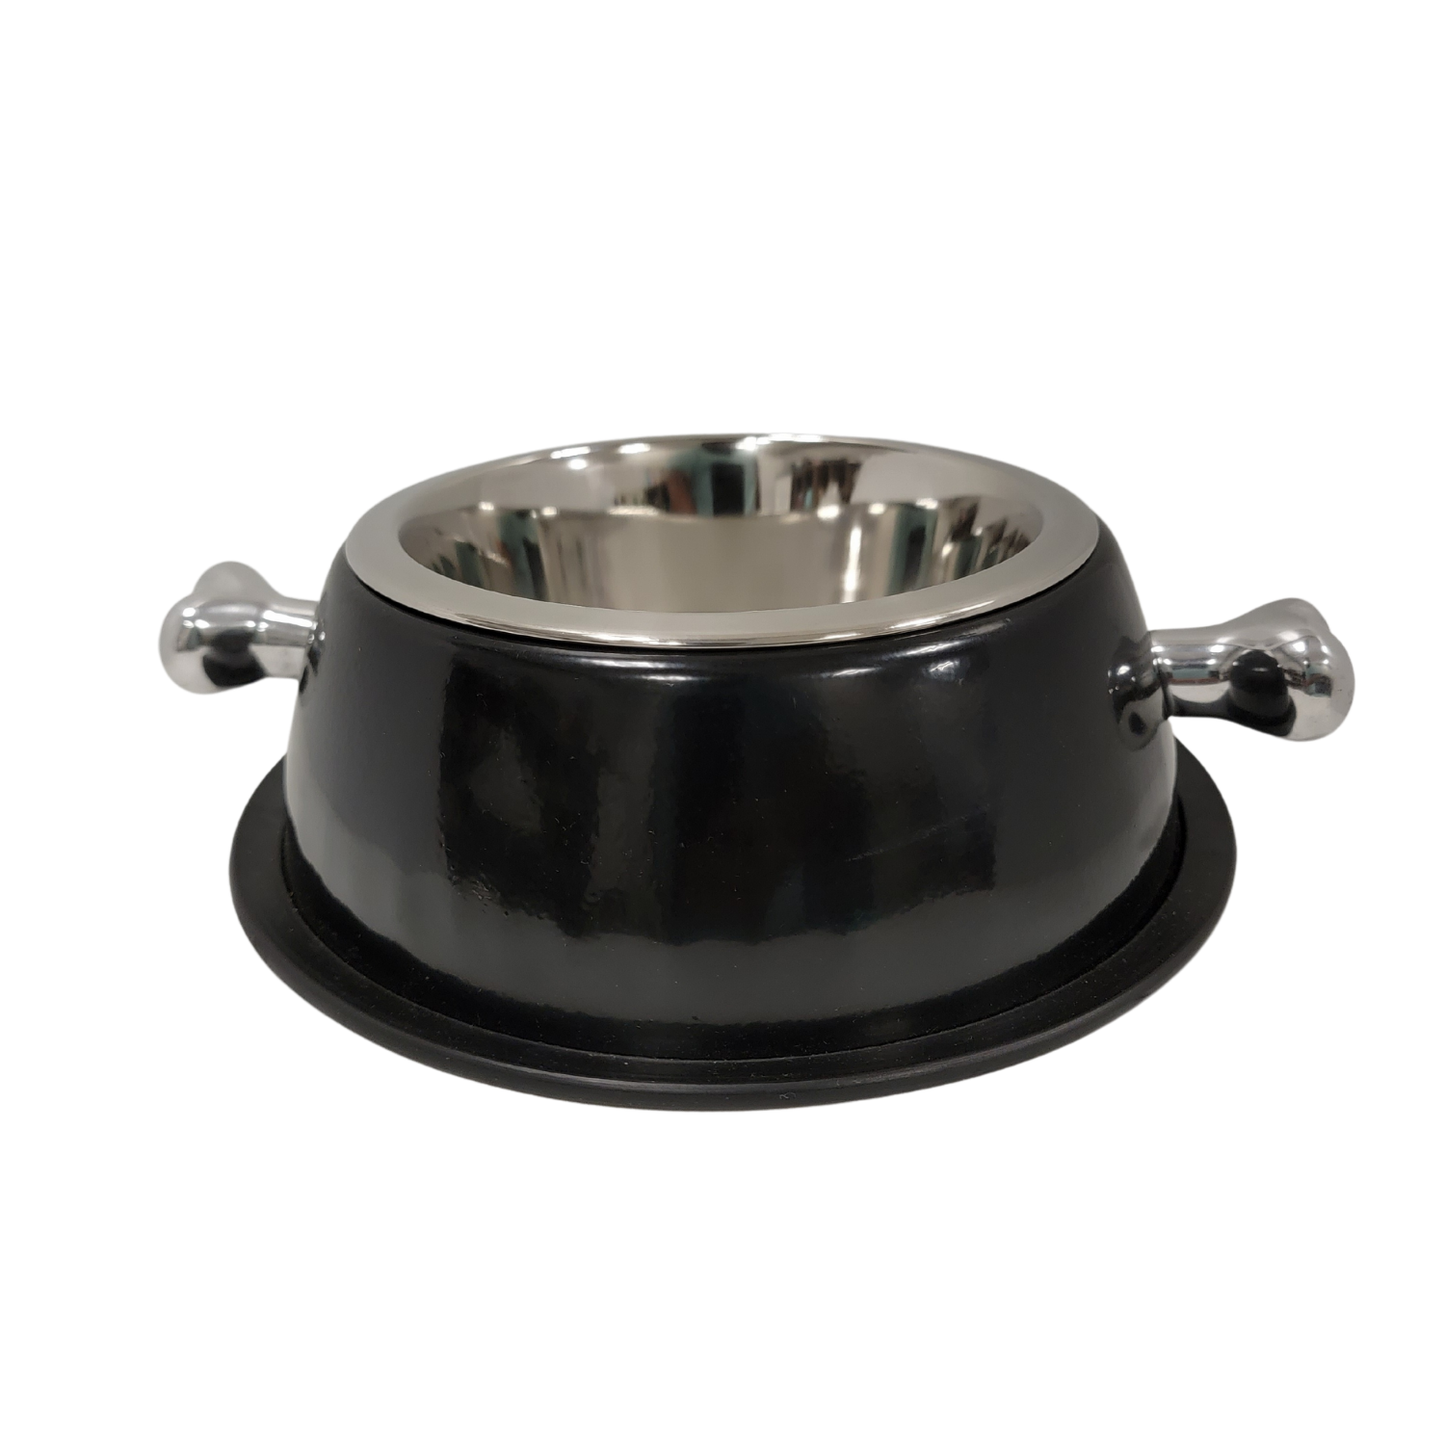 Deluxe Stainless Steel Dog Bowl with Bone Handles Black Image